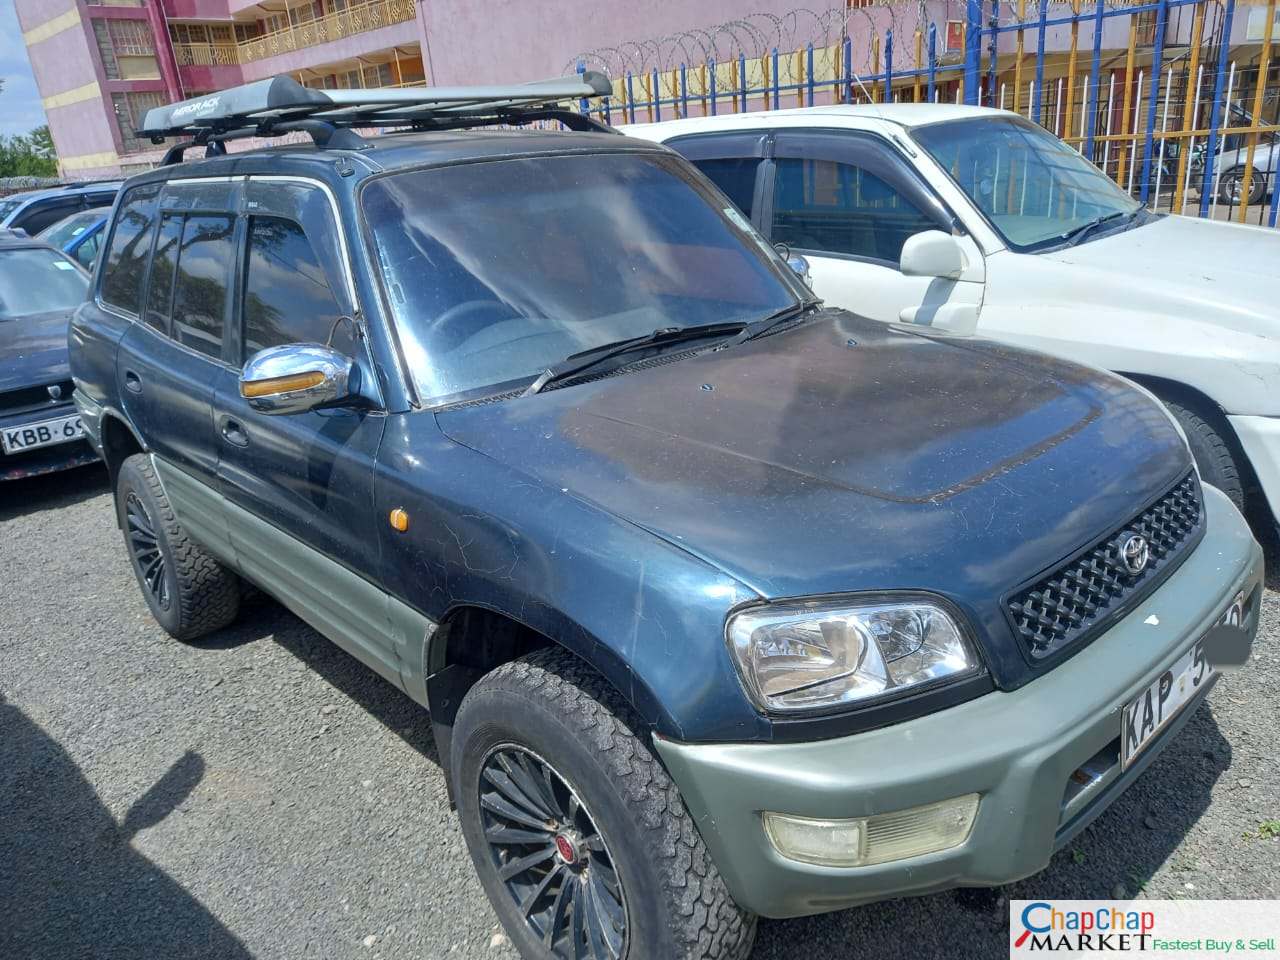 Toyota RAV4 for sale in Kenya CHEAPEST You Pay 30% Deposit installments Trade in OK EXCLUSIVE